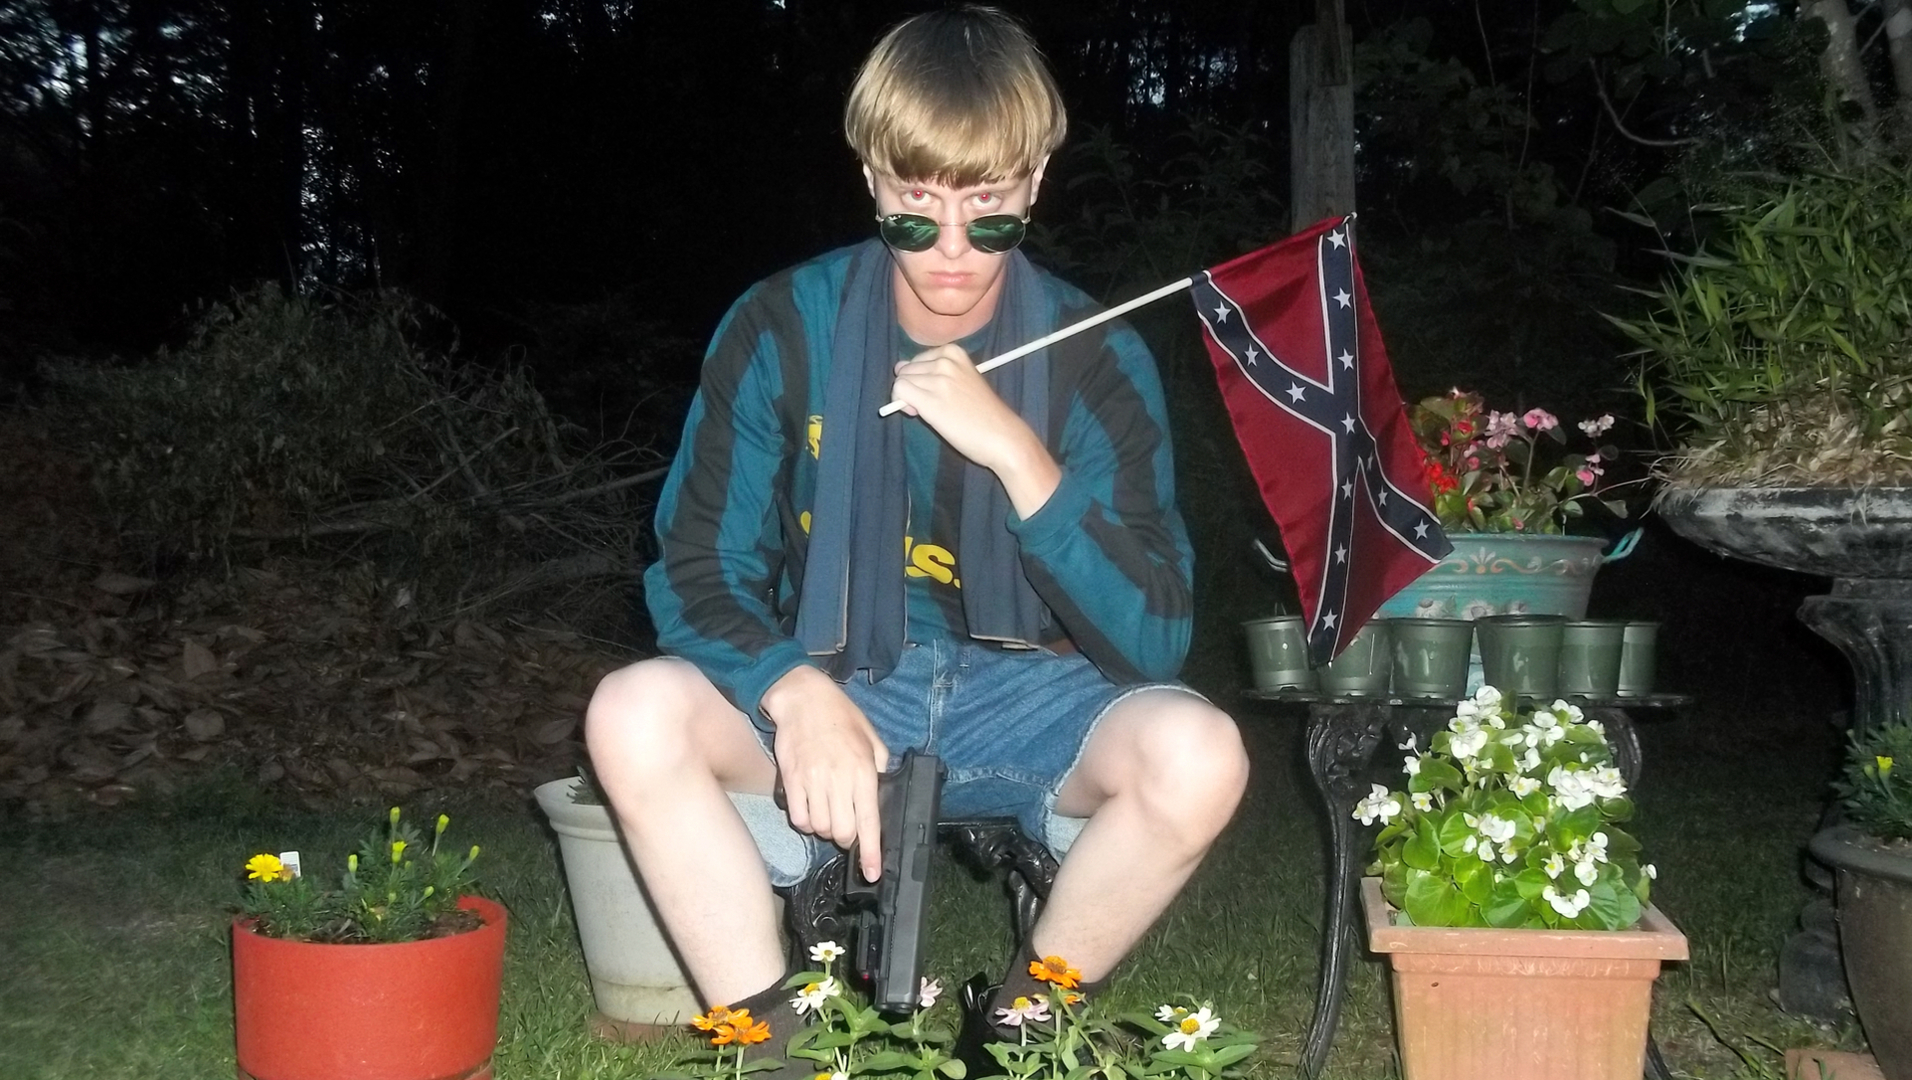 Domestic-Terrorism-Right-Wing-Extremist-White-Supremacist-Dylan-Roof-1.jpg